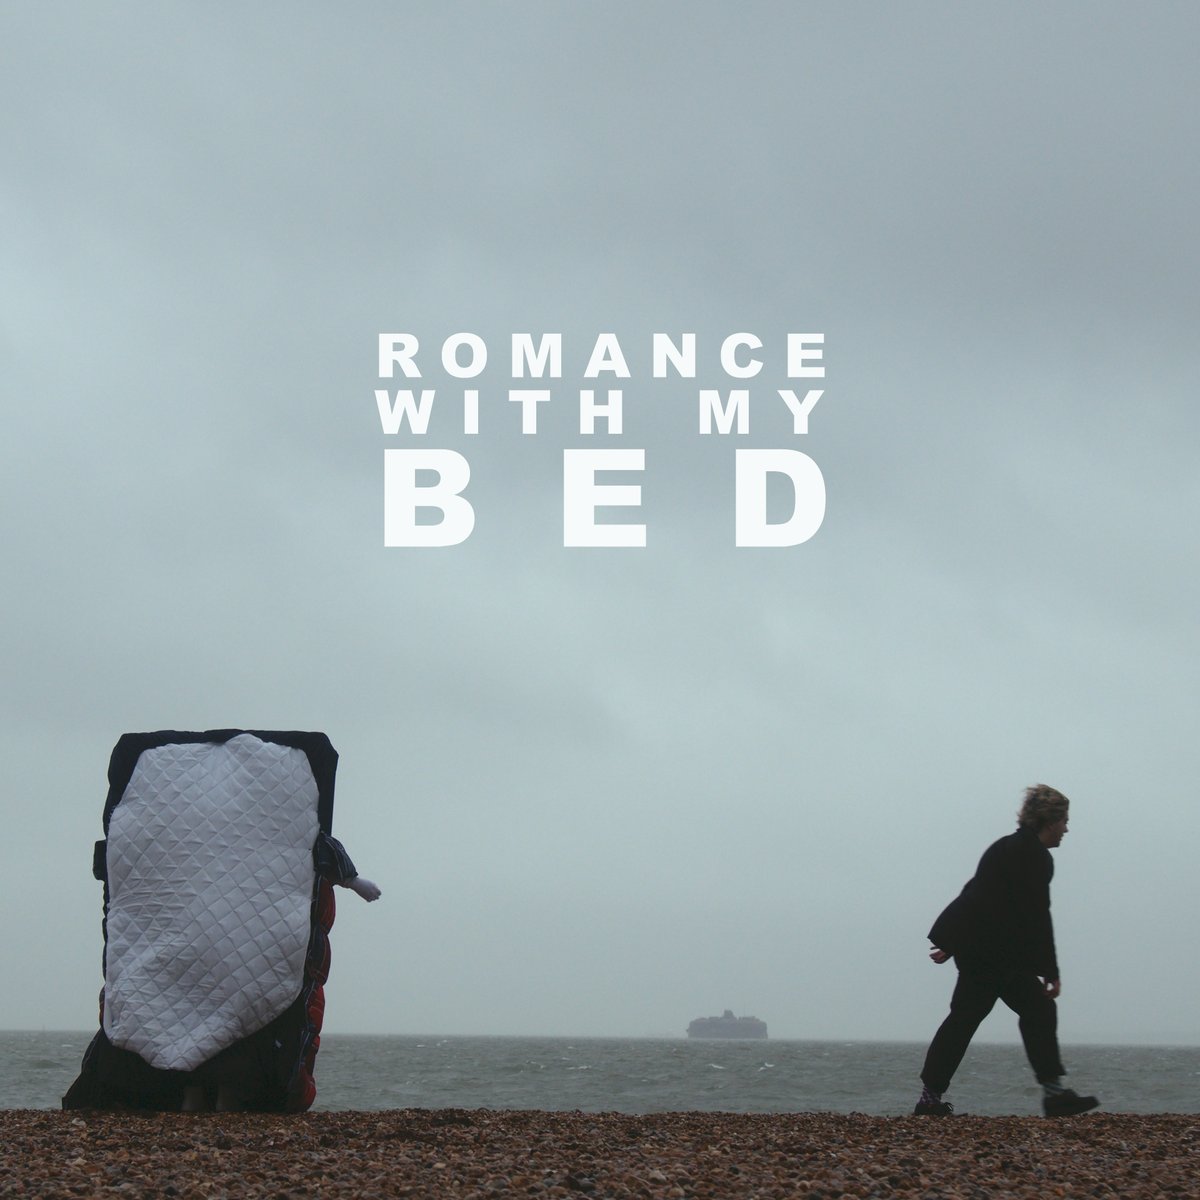 #Update @buzzkill_joy currently promoting new single ‘Romance With My Bed’ to be released on 1st December. Available for pre-save here bit.ly/3RhFGuR! #UnsignedHour